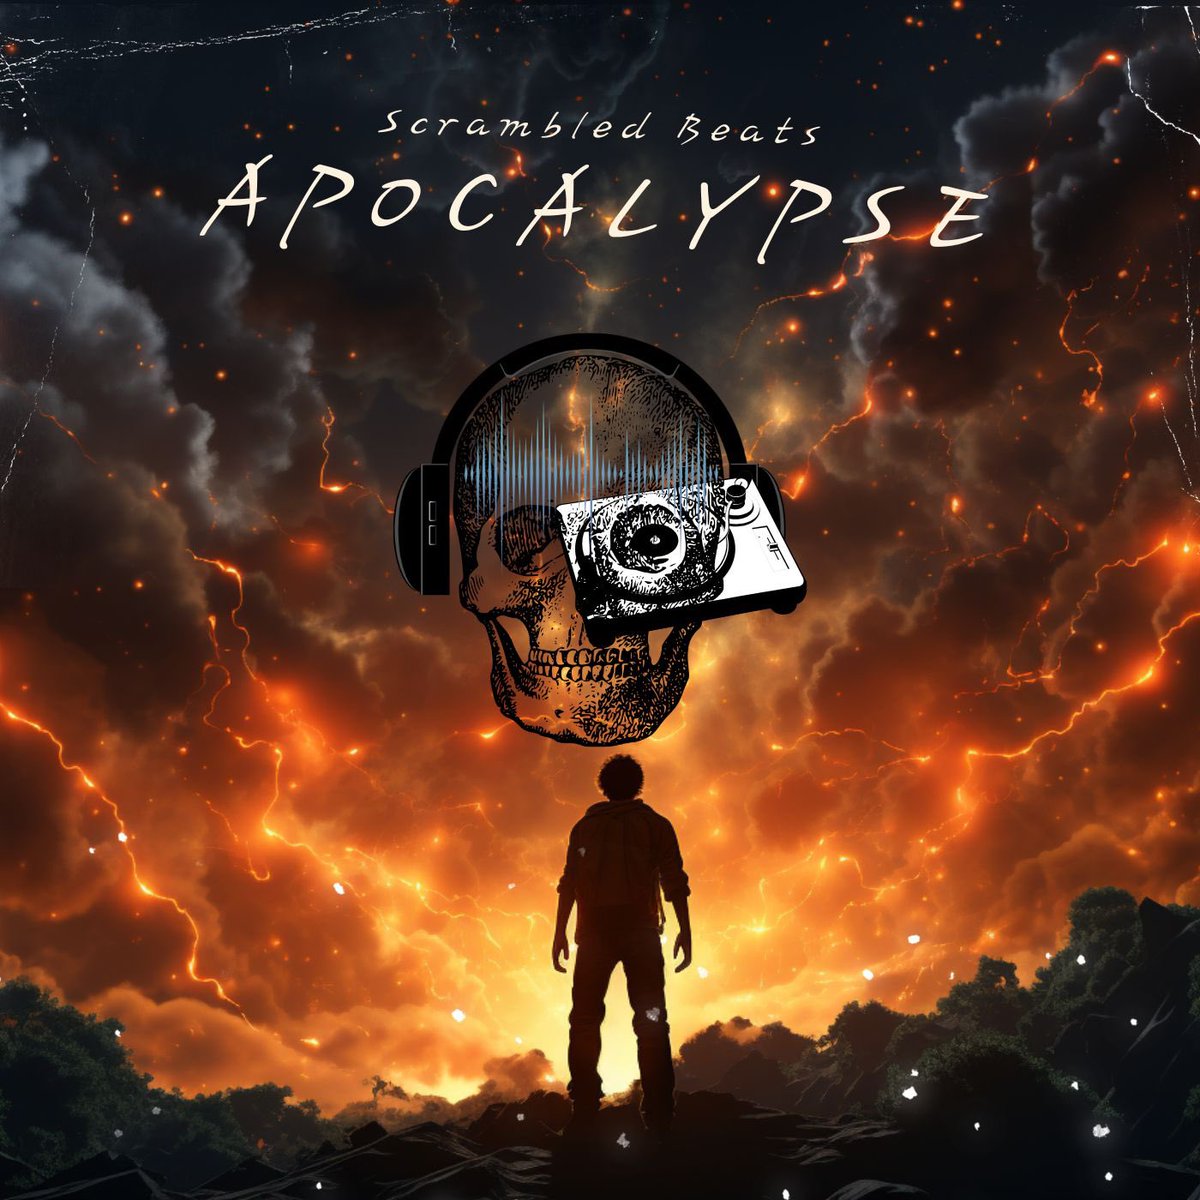 Track 14, same name as the album APOCALYPSE. Thank you to all those who shared my music hope you enjoy what’s your favorite track in the comments.

spotify.link/MX5zBlognJb

the album link 👇 
distrokid.com/hyperfollow/sc…

Please like and share thank you 
#supportindependentartists